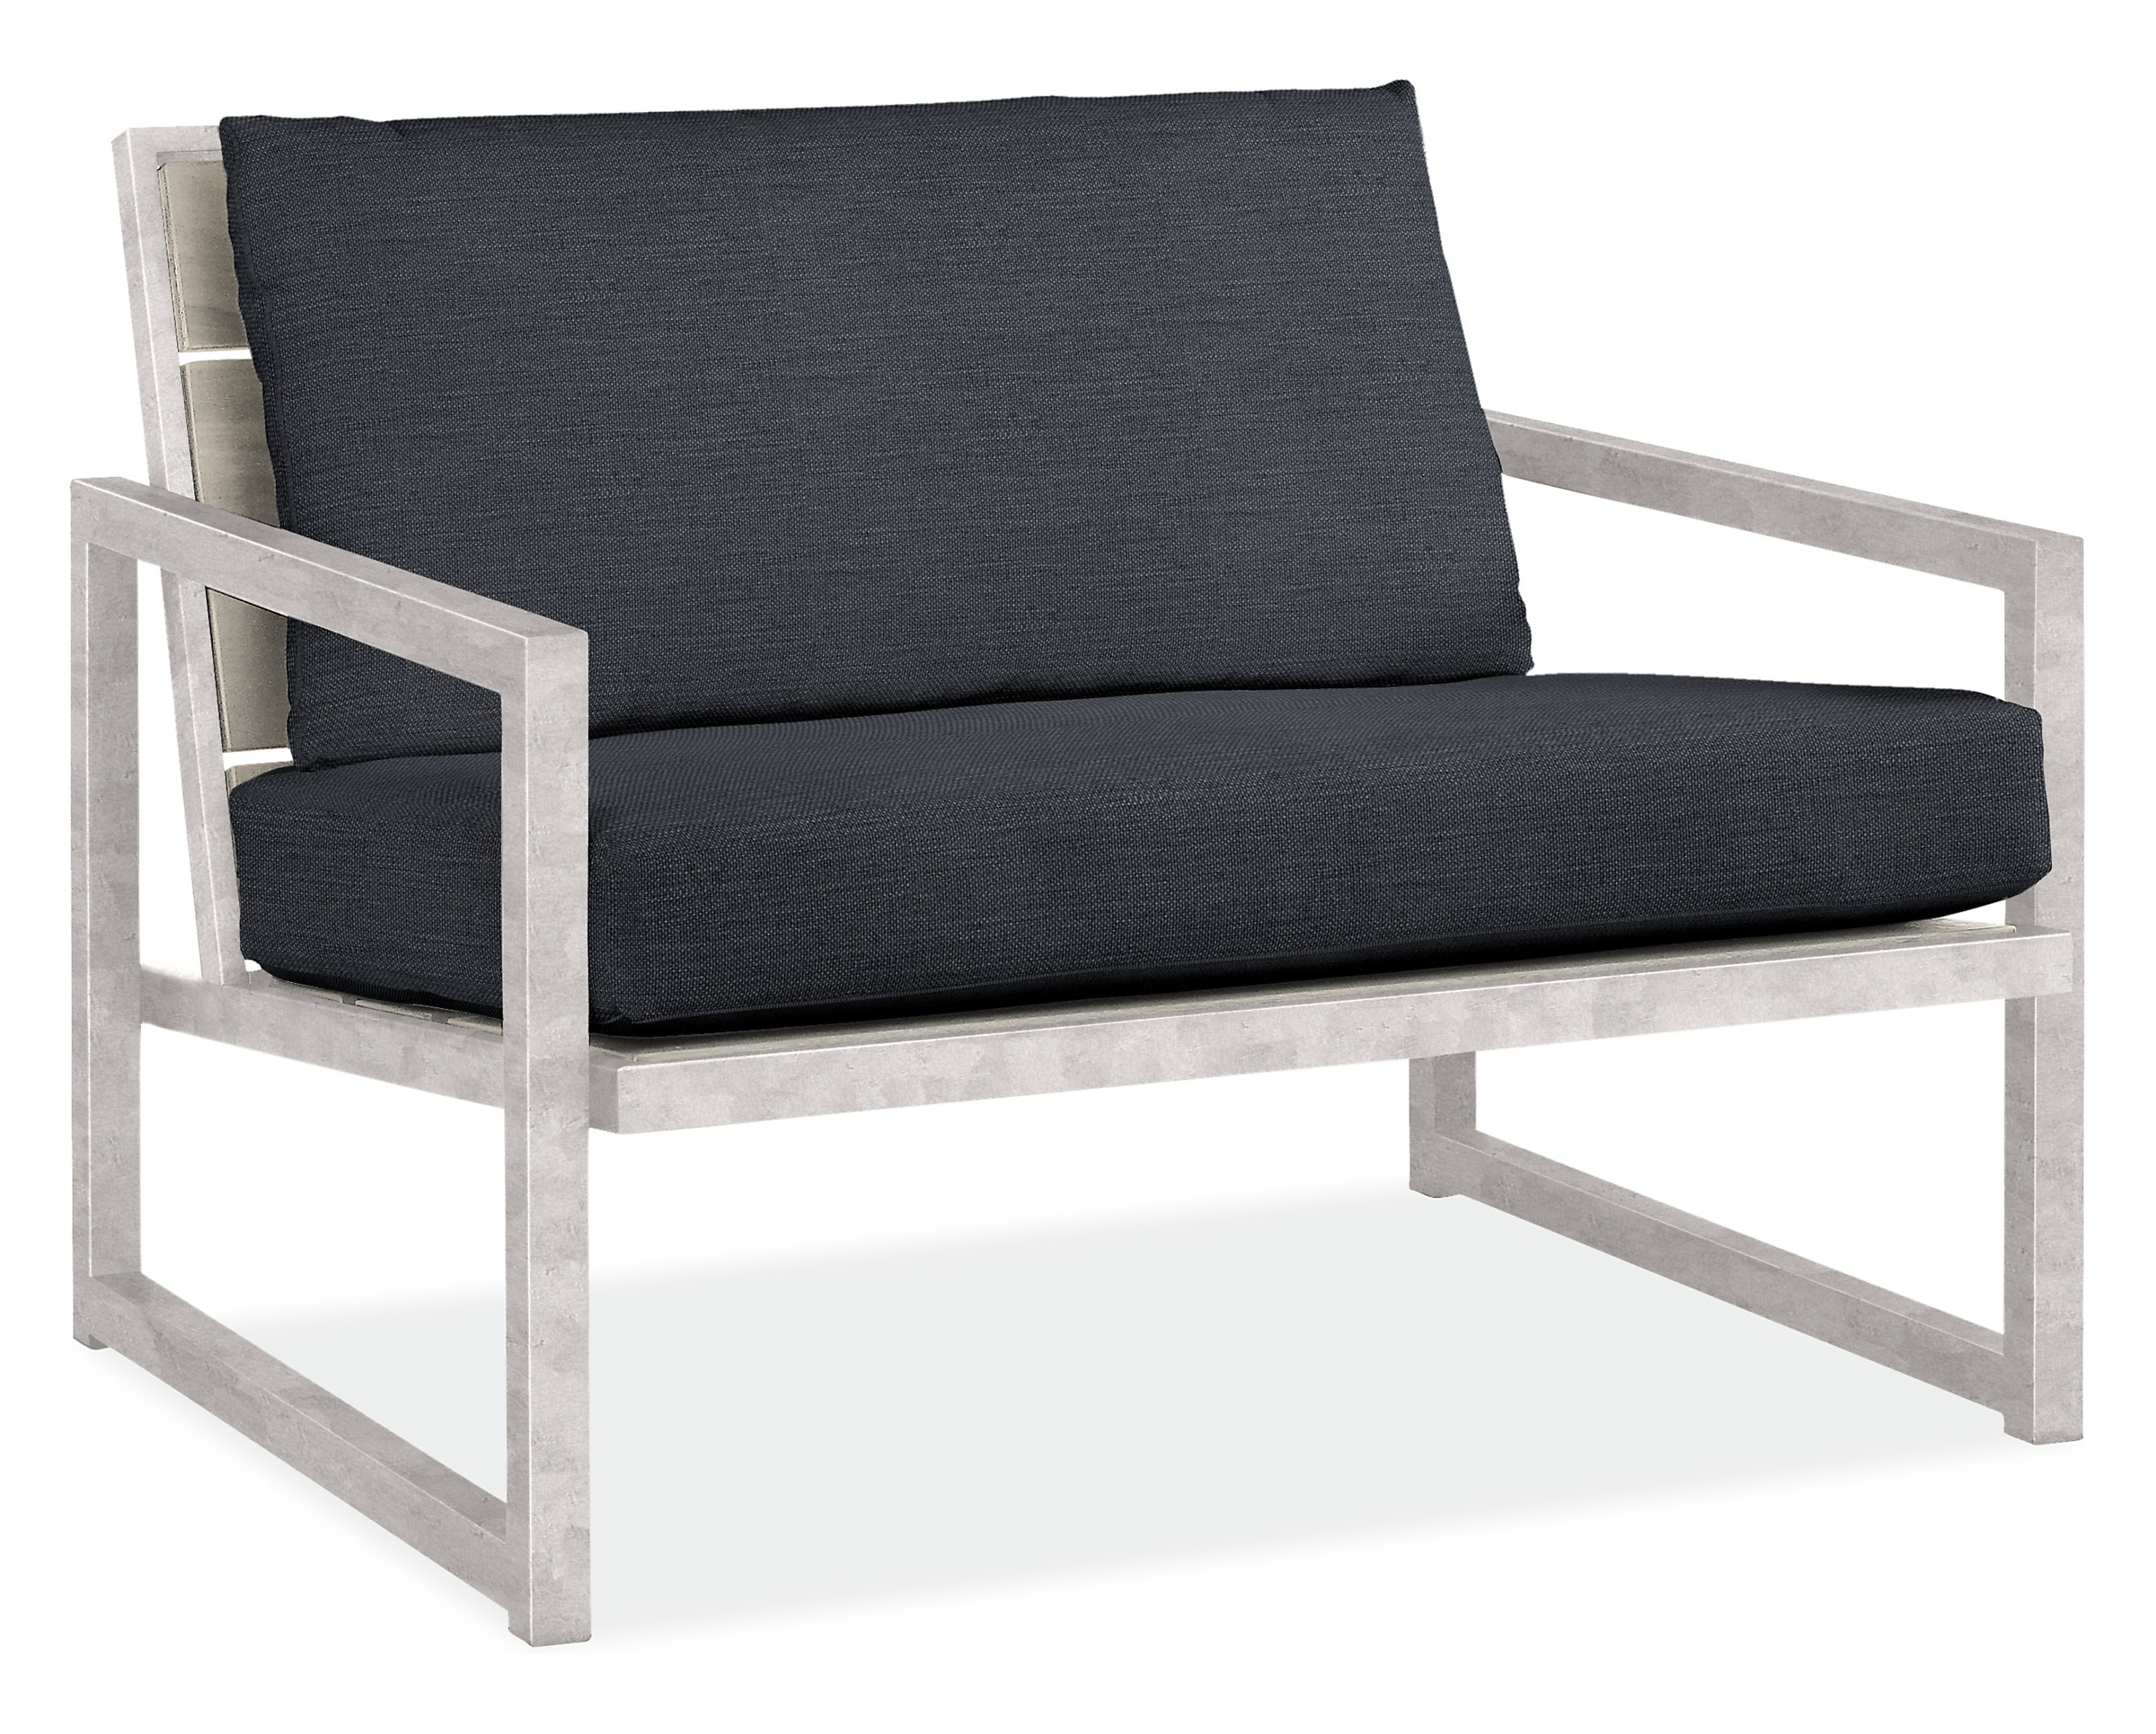 Montego Lounge Chairs in Urban Wood